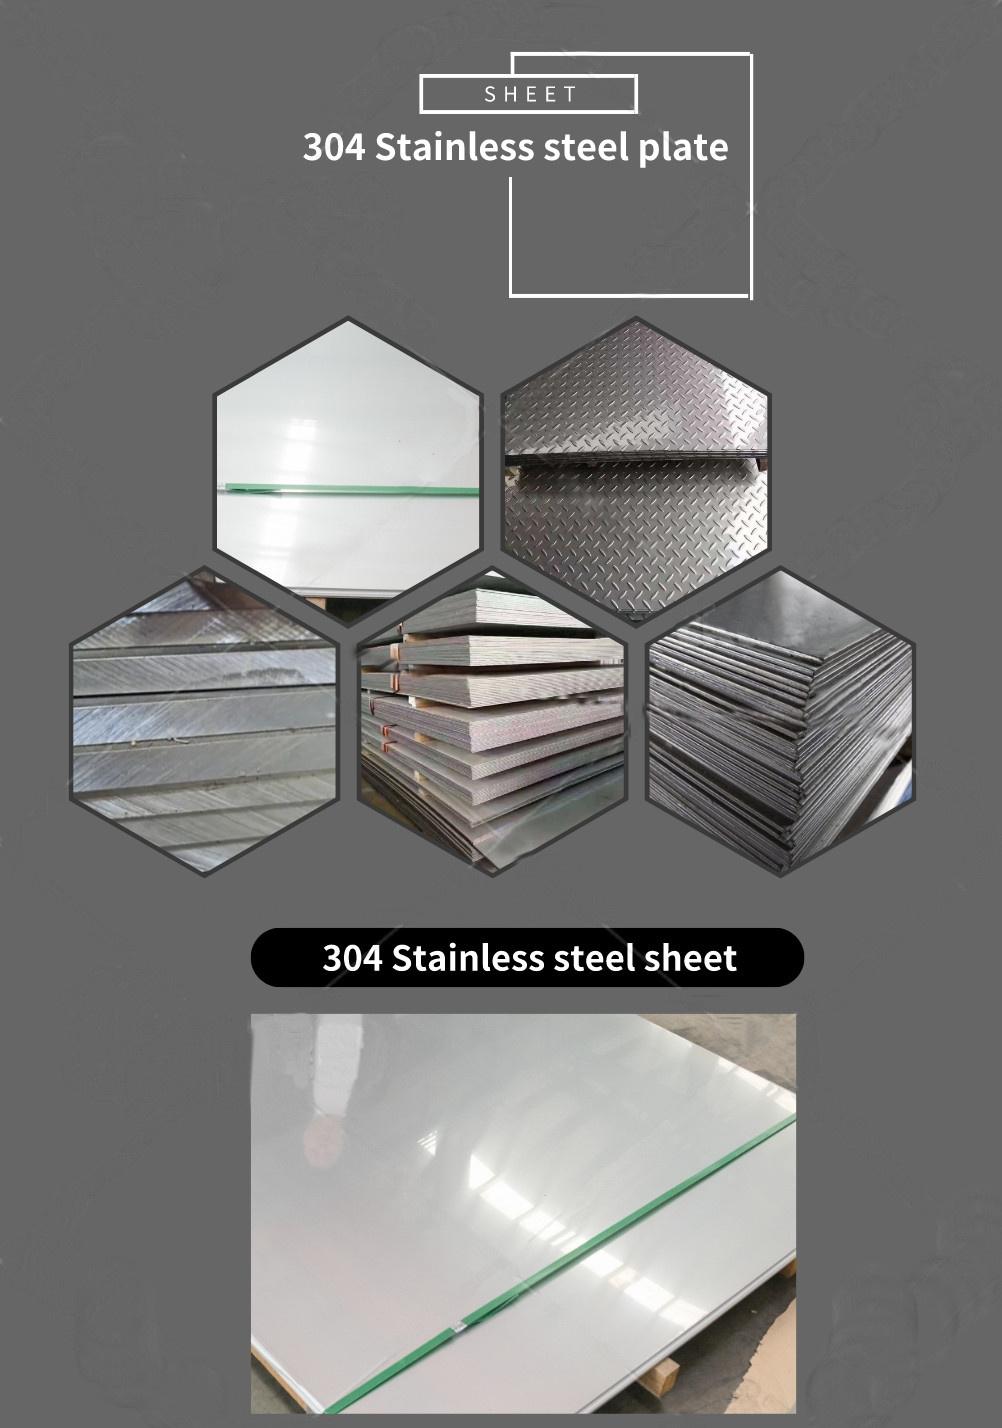 ASTM/GB/JIS 201 321 347 329 430 Hot Rolled Stainless Steel Plate for Boat Board